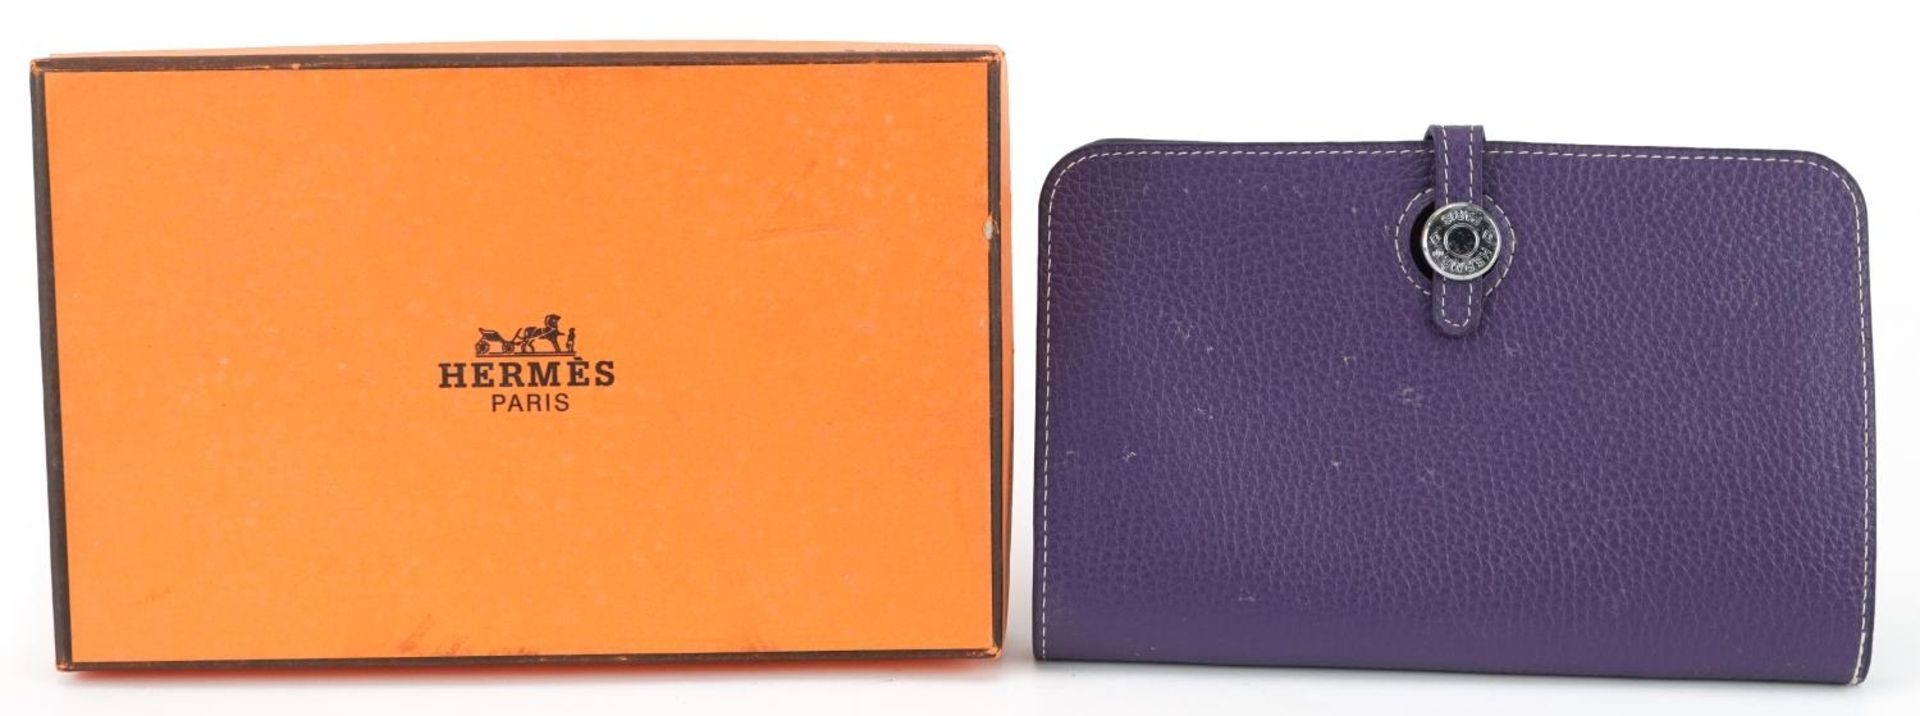 Hermes, French purple leather clutch purse with cardholder, dust bag and box, the clutch bag 19.